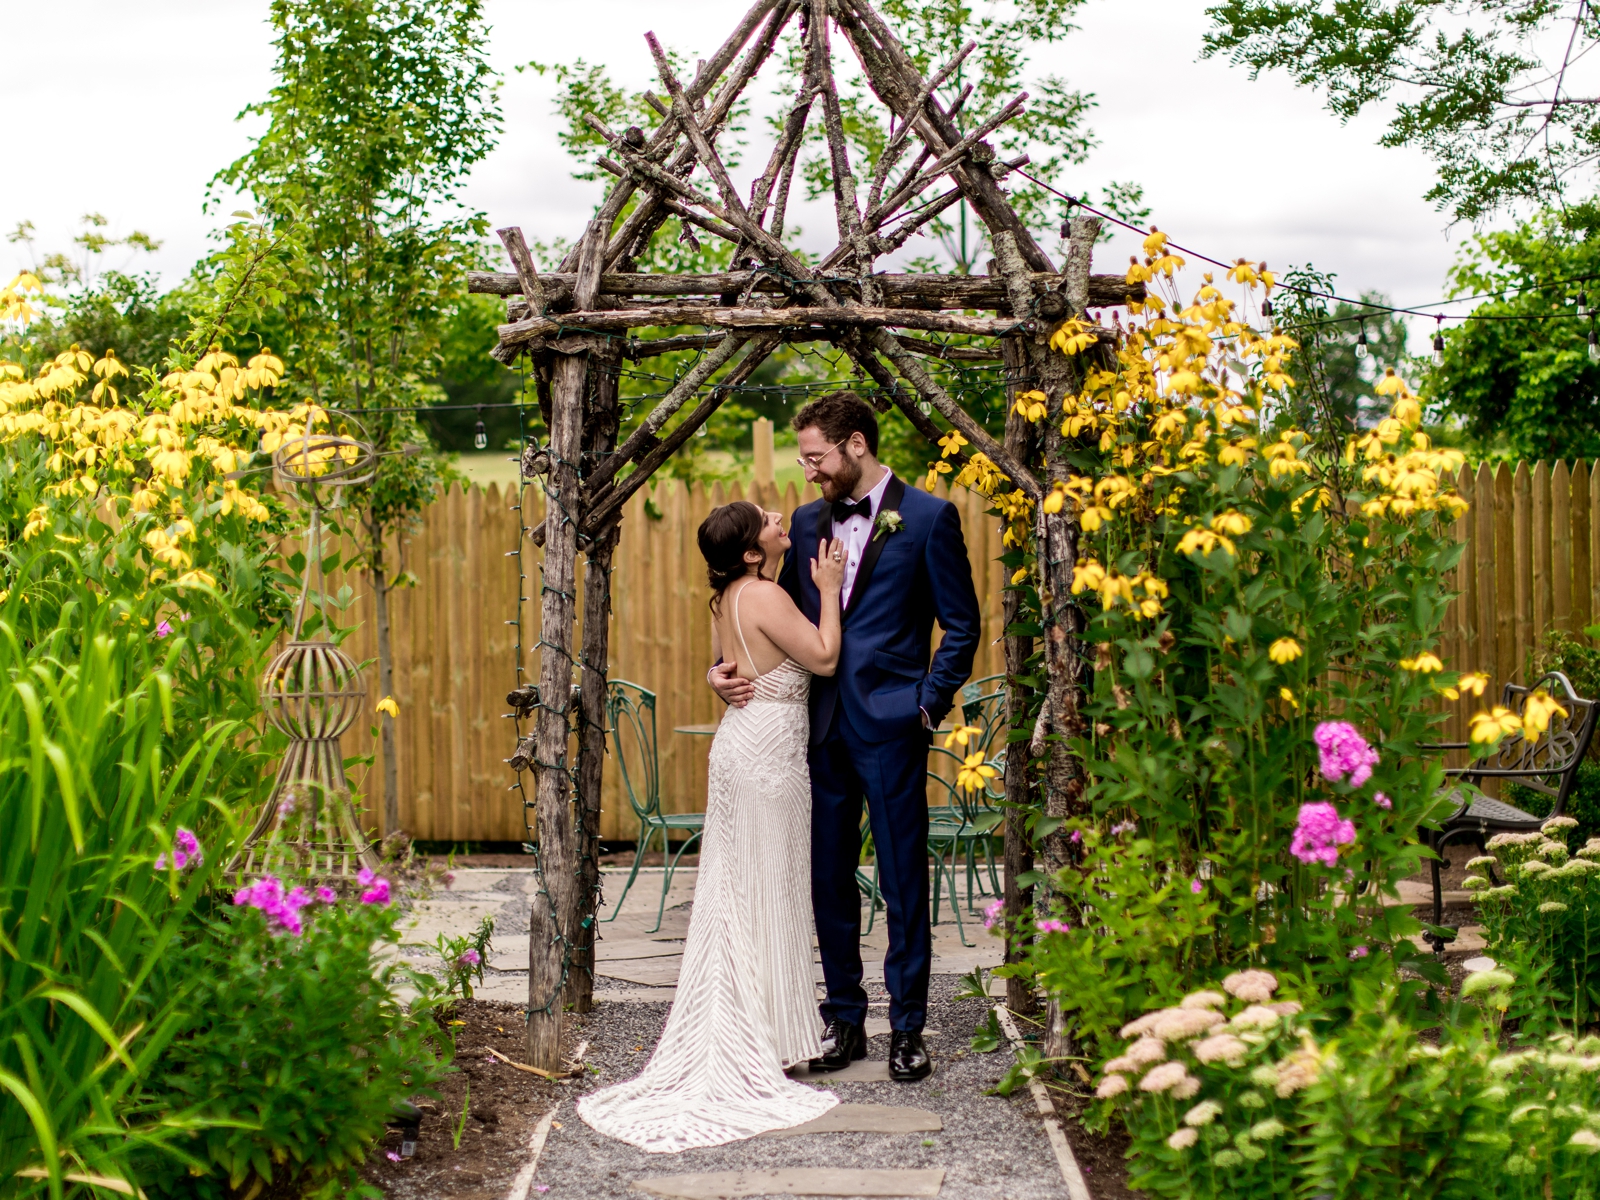 The bride and groom stand in a garden full of flowers. They stand beneath a wood arbor.